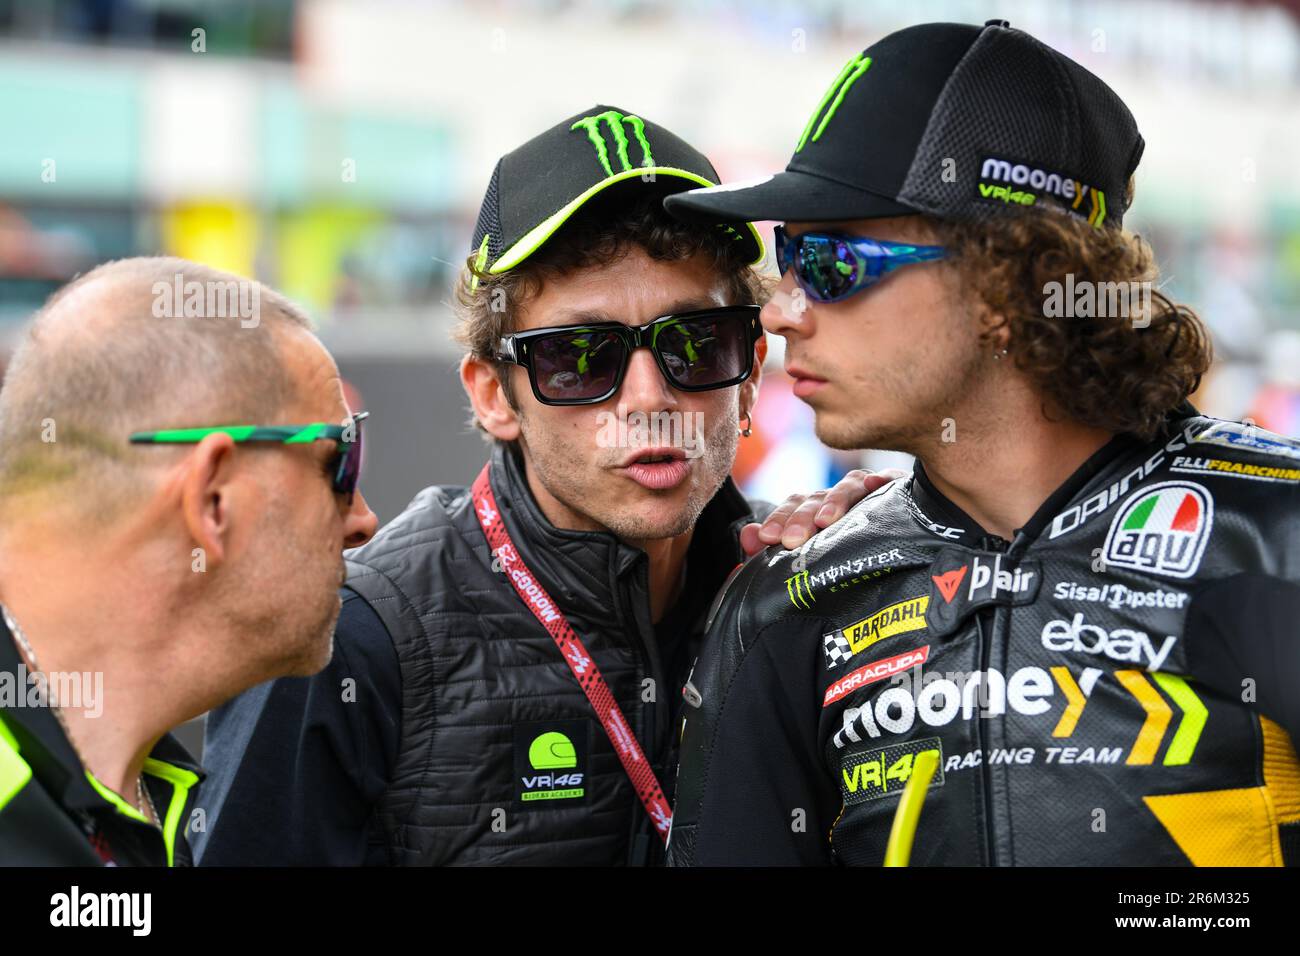 Mugello, Italy. 10th June, 2023. Valentino Rossi and Marco Bezzecchi IT  Mooney VR46 Racing Team Ducati in the starting grid during Tissot Sprint  MotoGP Grand Prix of Italy, MotoGP World Championship in